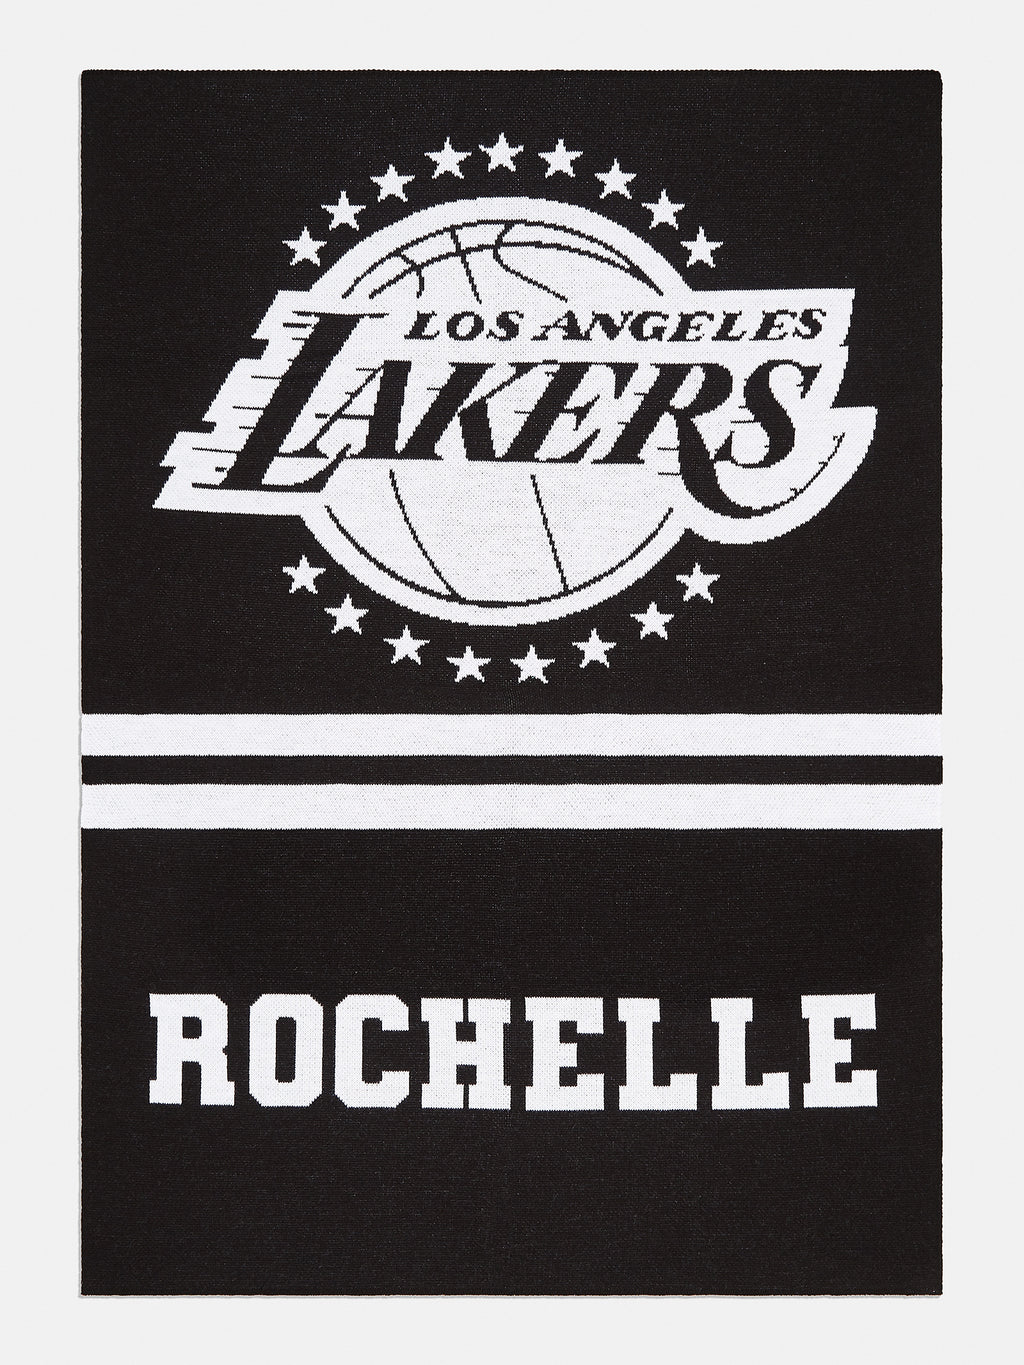 Los Angeles Lakers BaubleBar Team Jersey Necklace